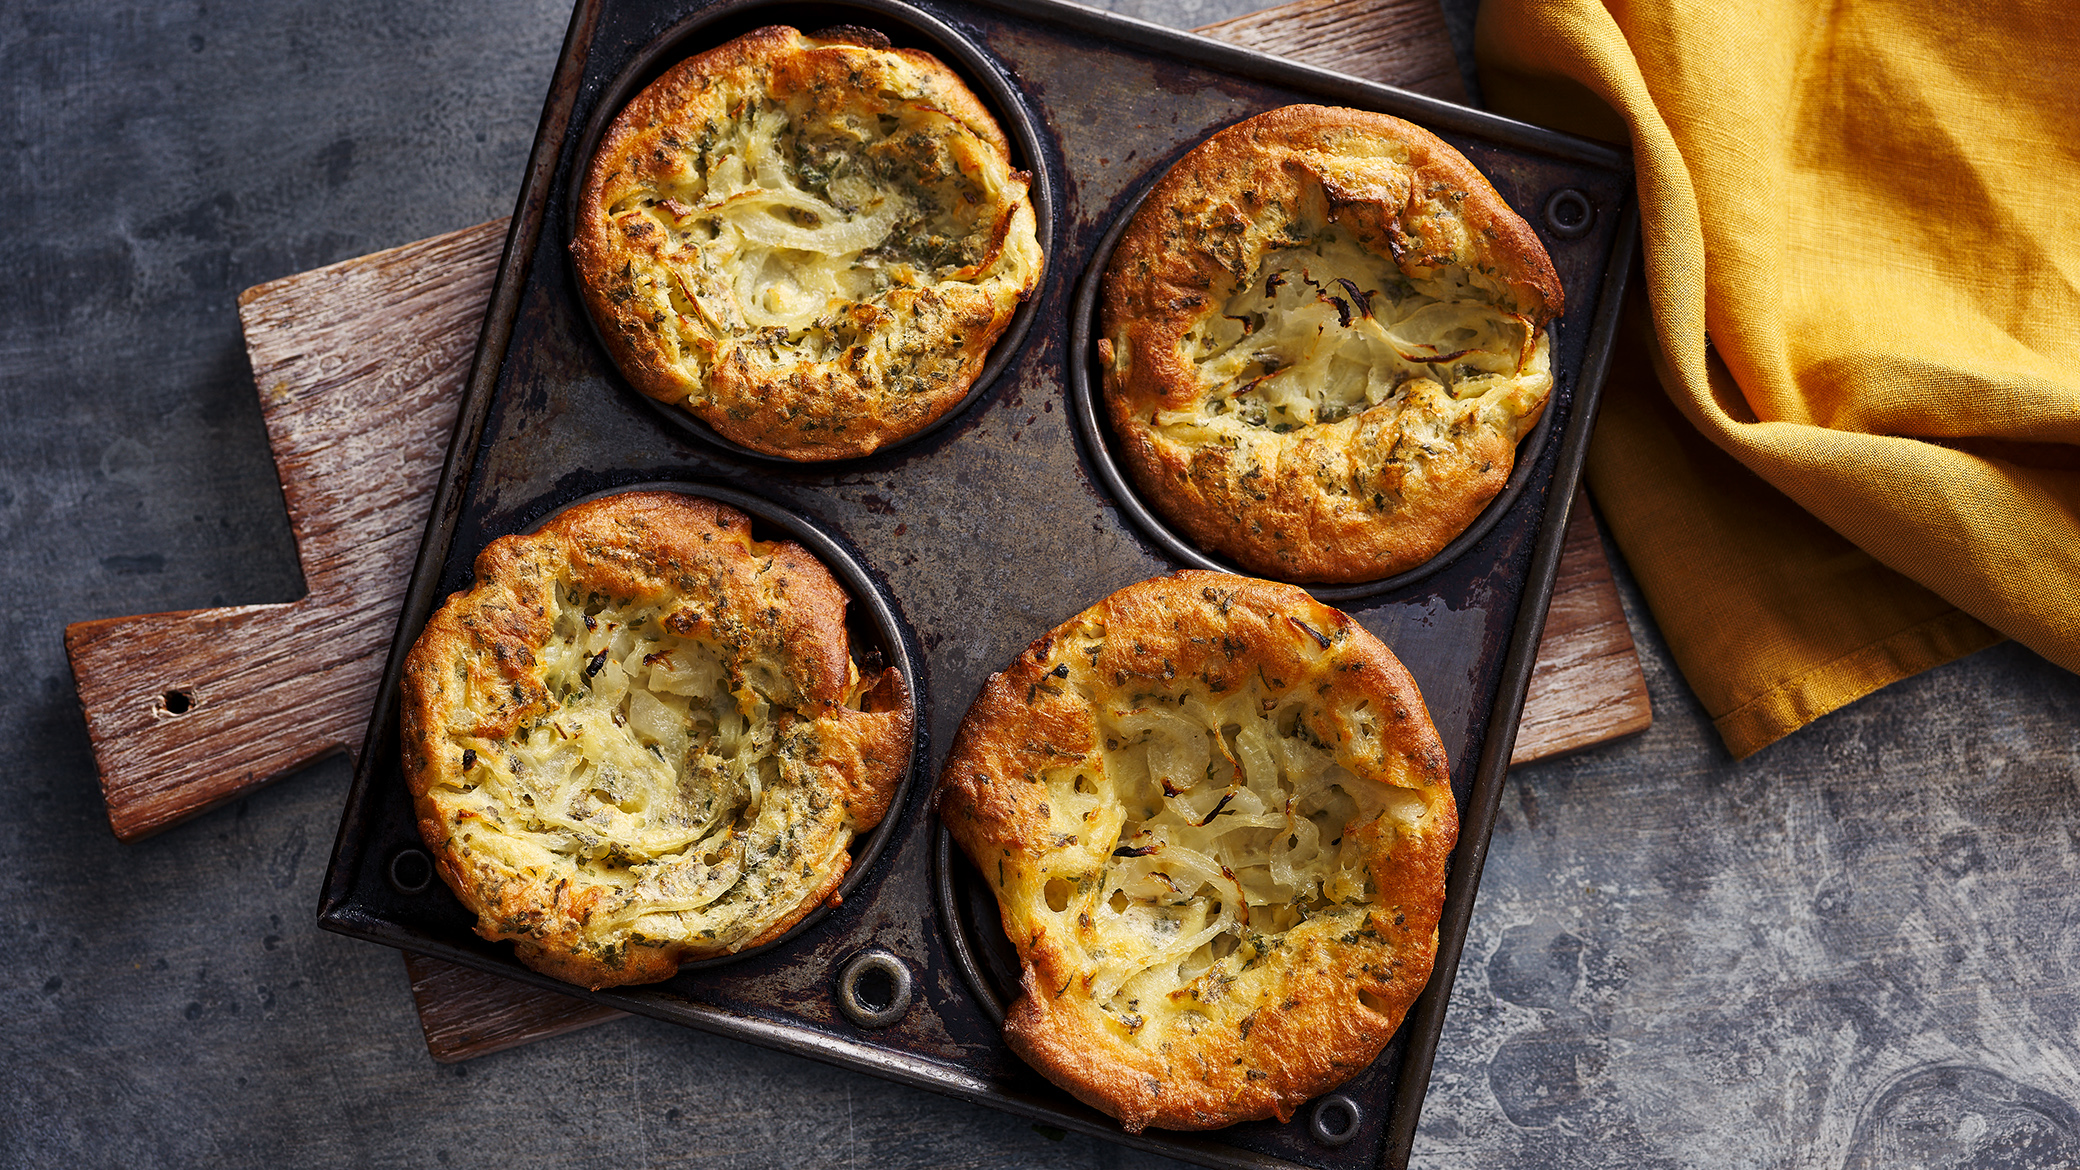 https://food-images.files.bbci.co.uk/food/recipes/sage_and_onion_yorkshire_61322_16x9.jpg